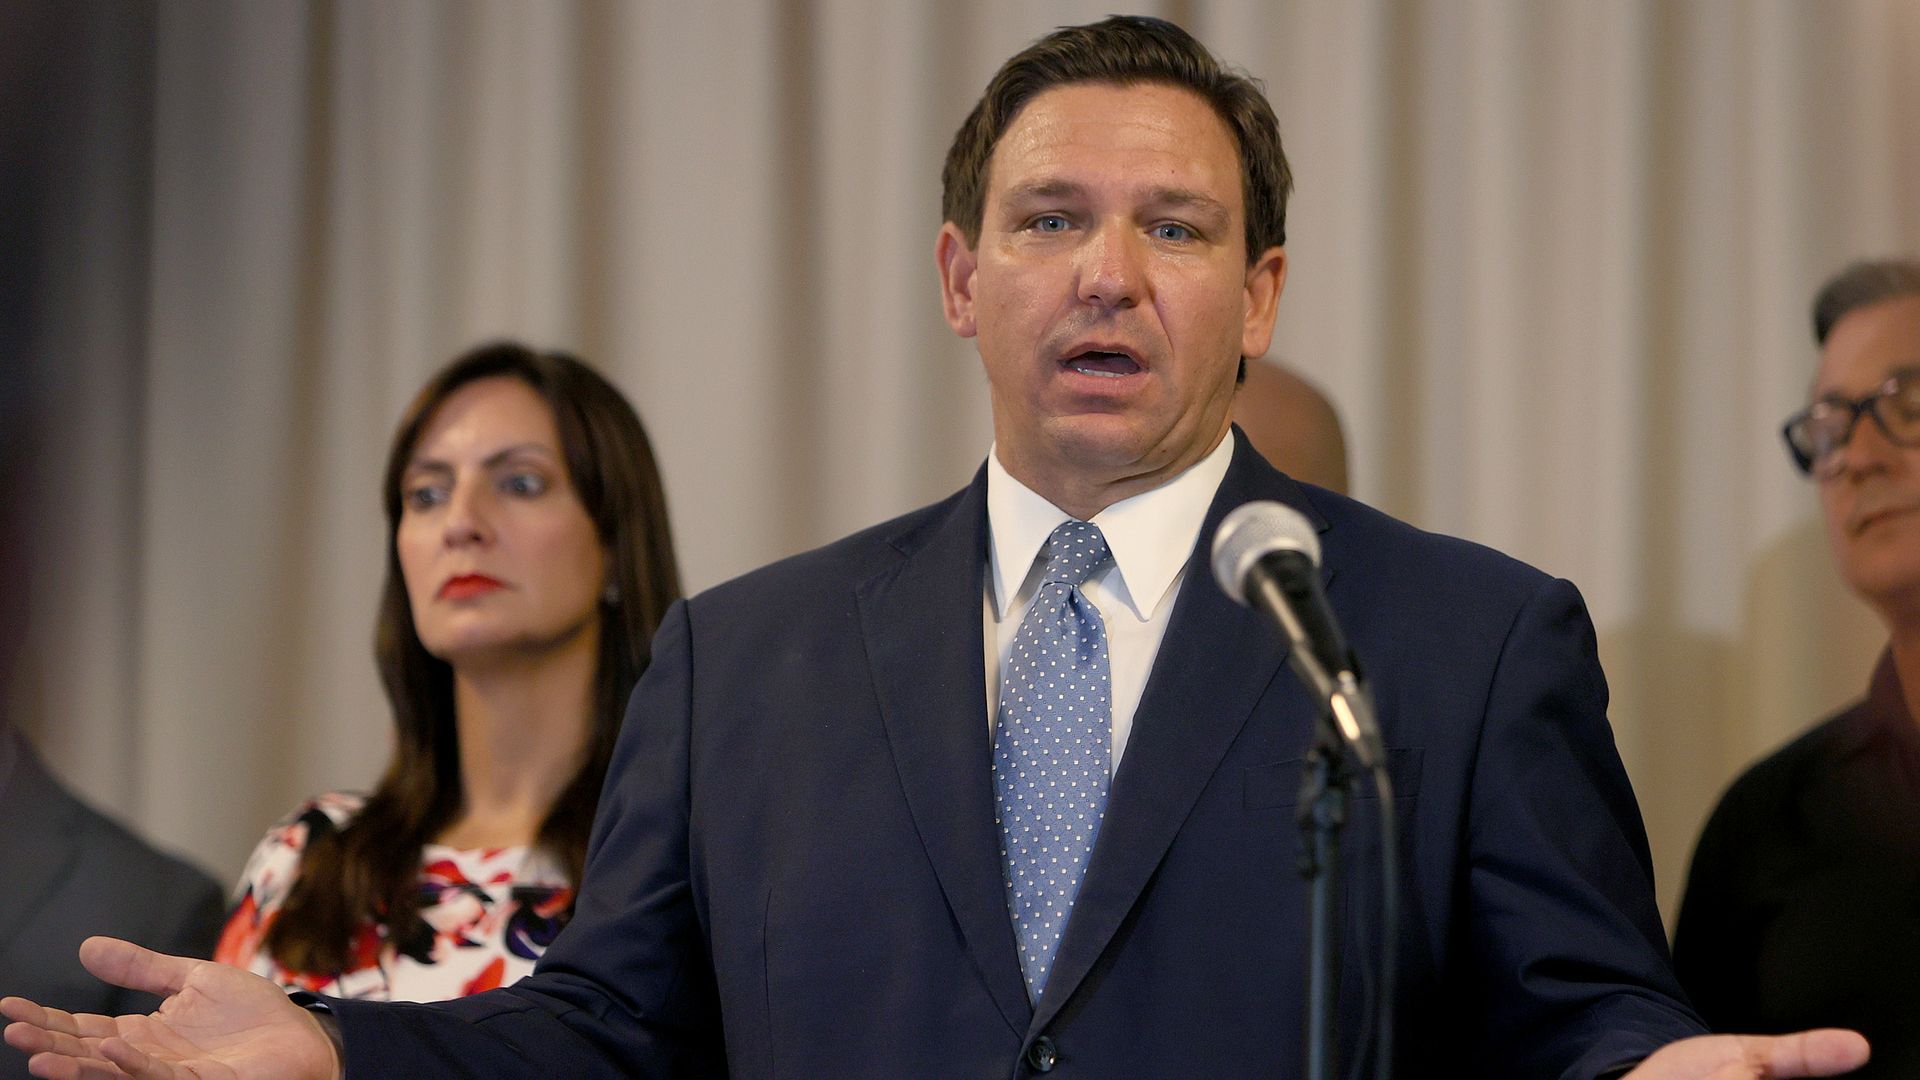 Florida Gov. Ron DeSantis speaks during an event at the Grand Beach Hotel Surfside on August 10